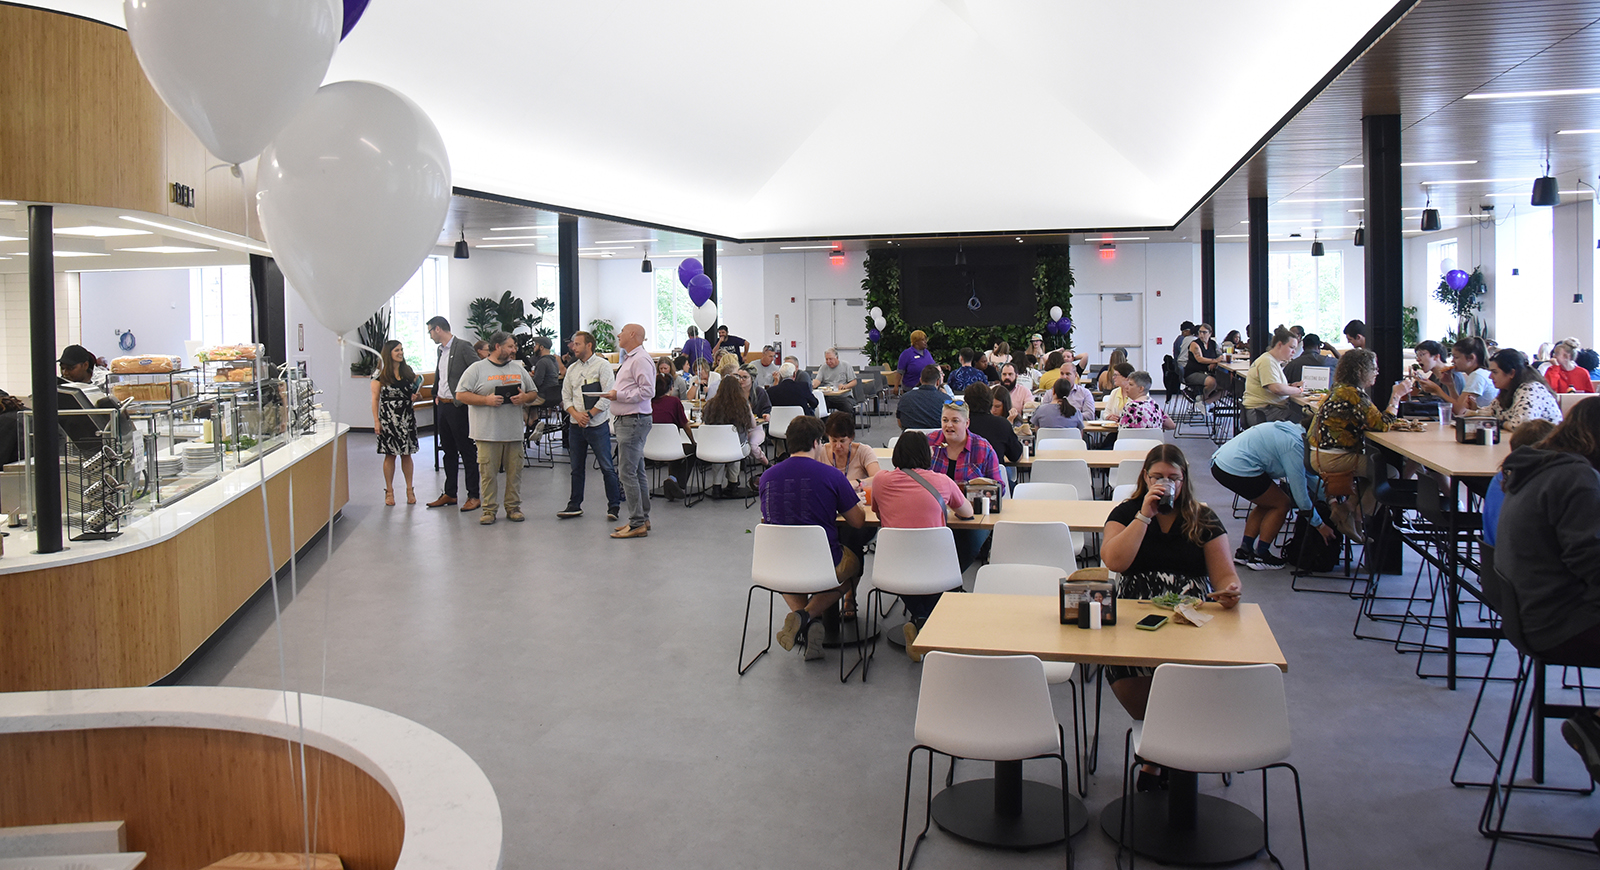 Photo of a crowded Anderson Dining Hall on opening day, with people eating and talking. There are many purple balloons.